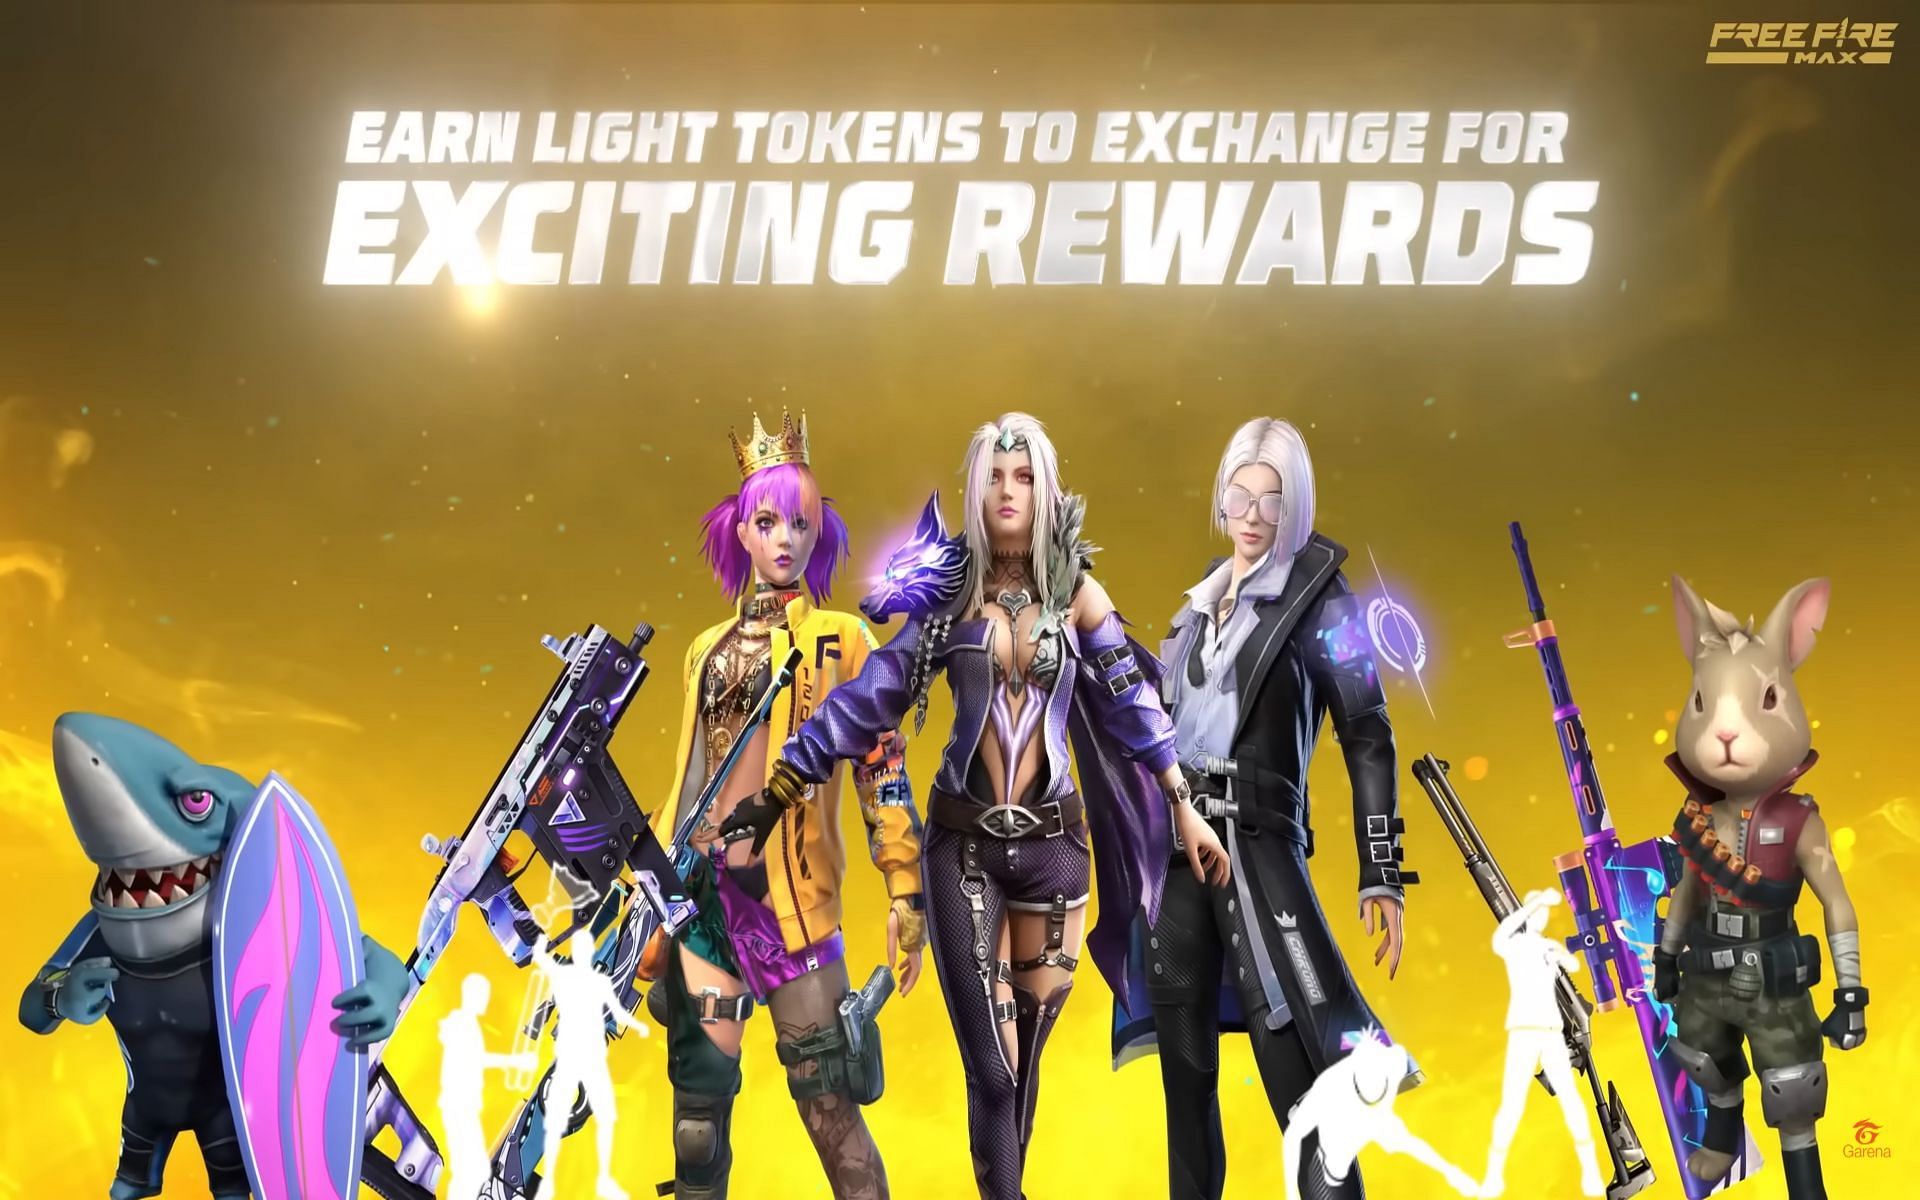 Get free rewards using the Light tokens in 